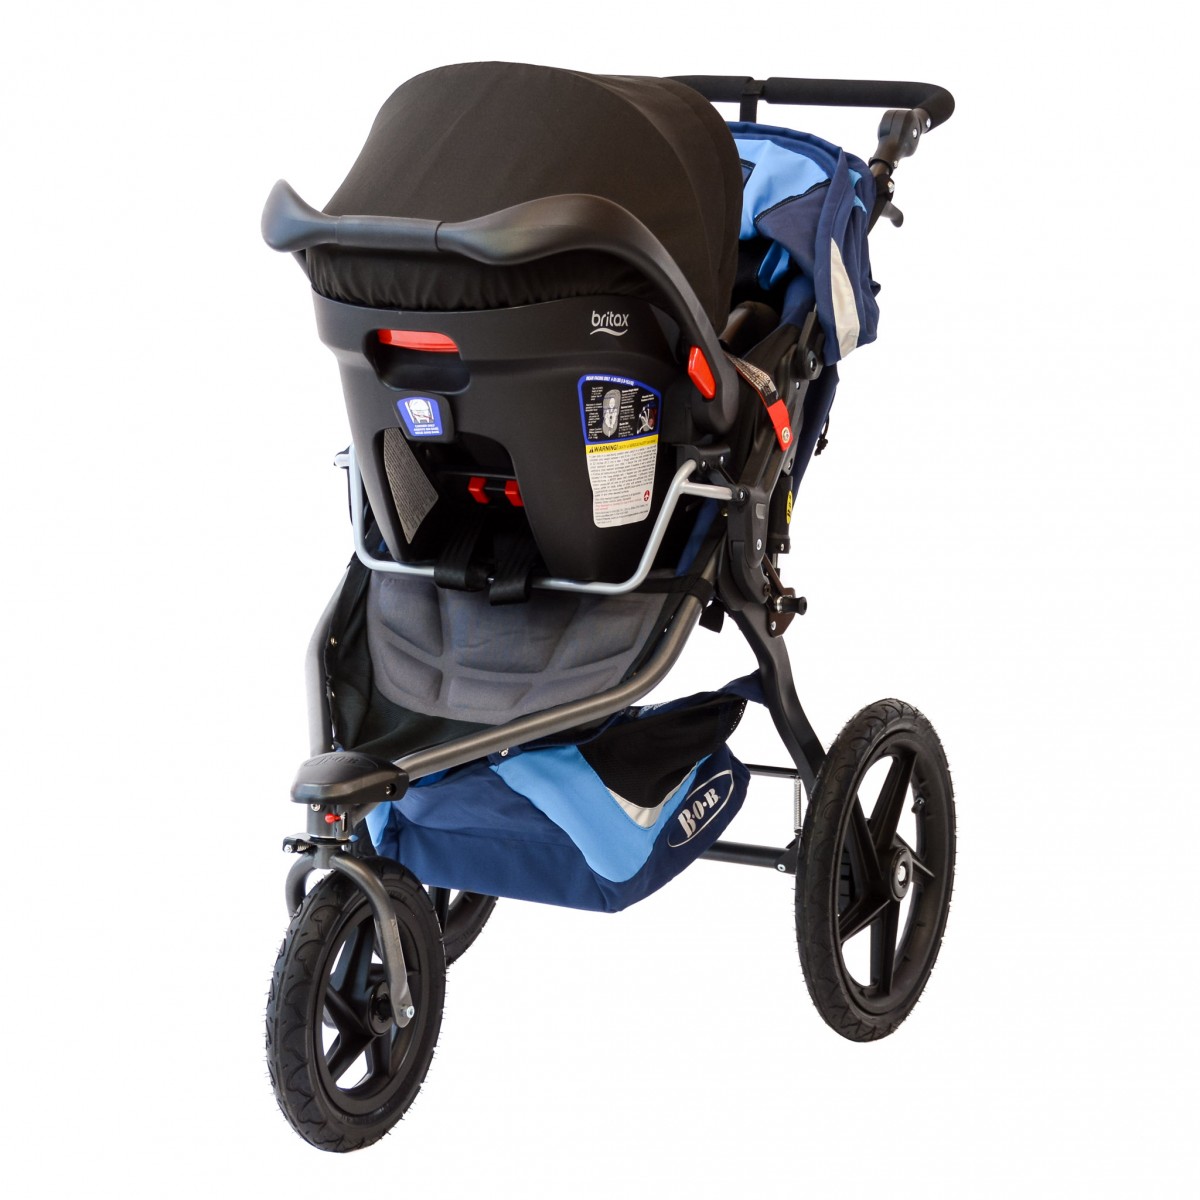 bob revolution flex 3.0 combo stroller and car seat combo review